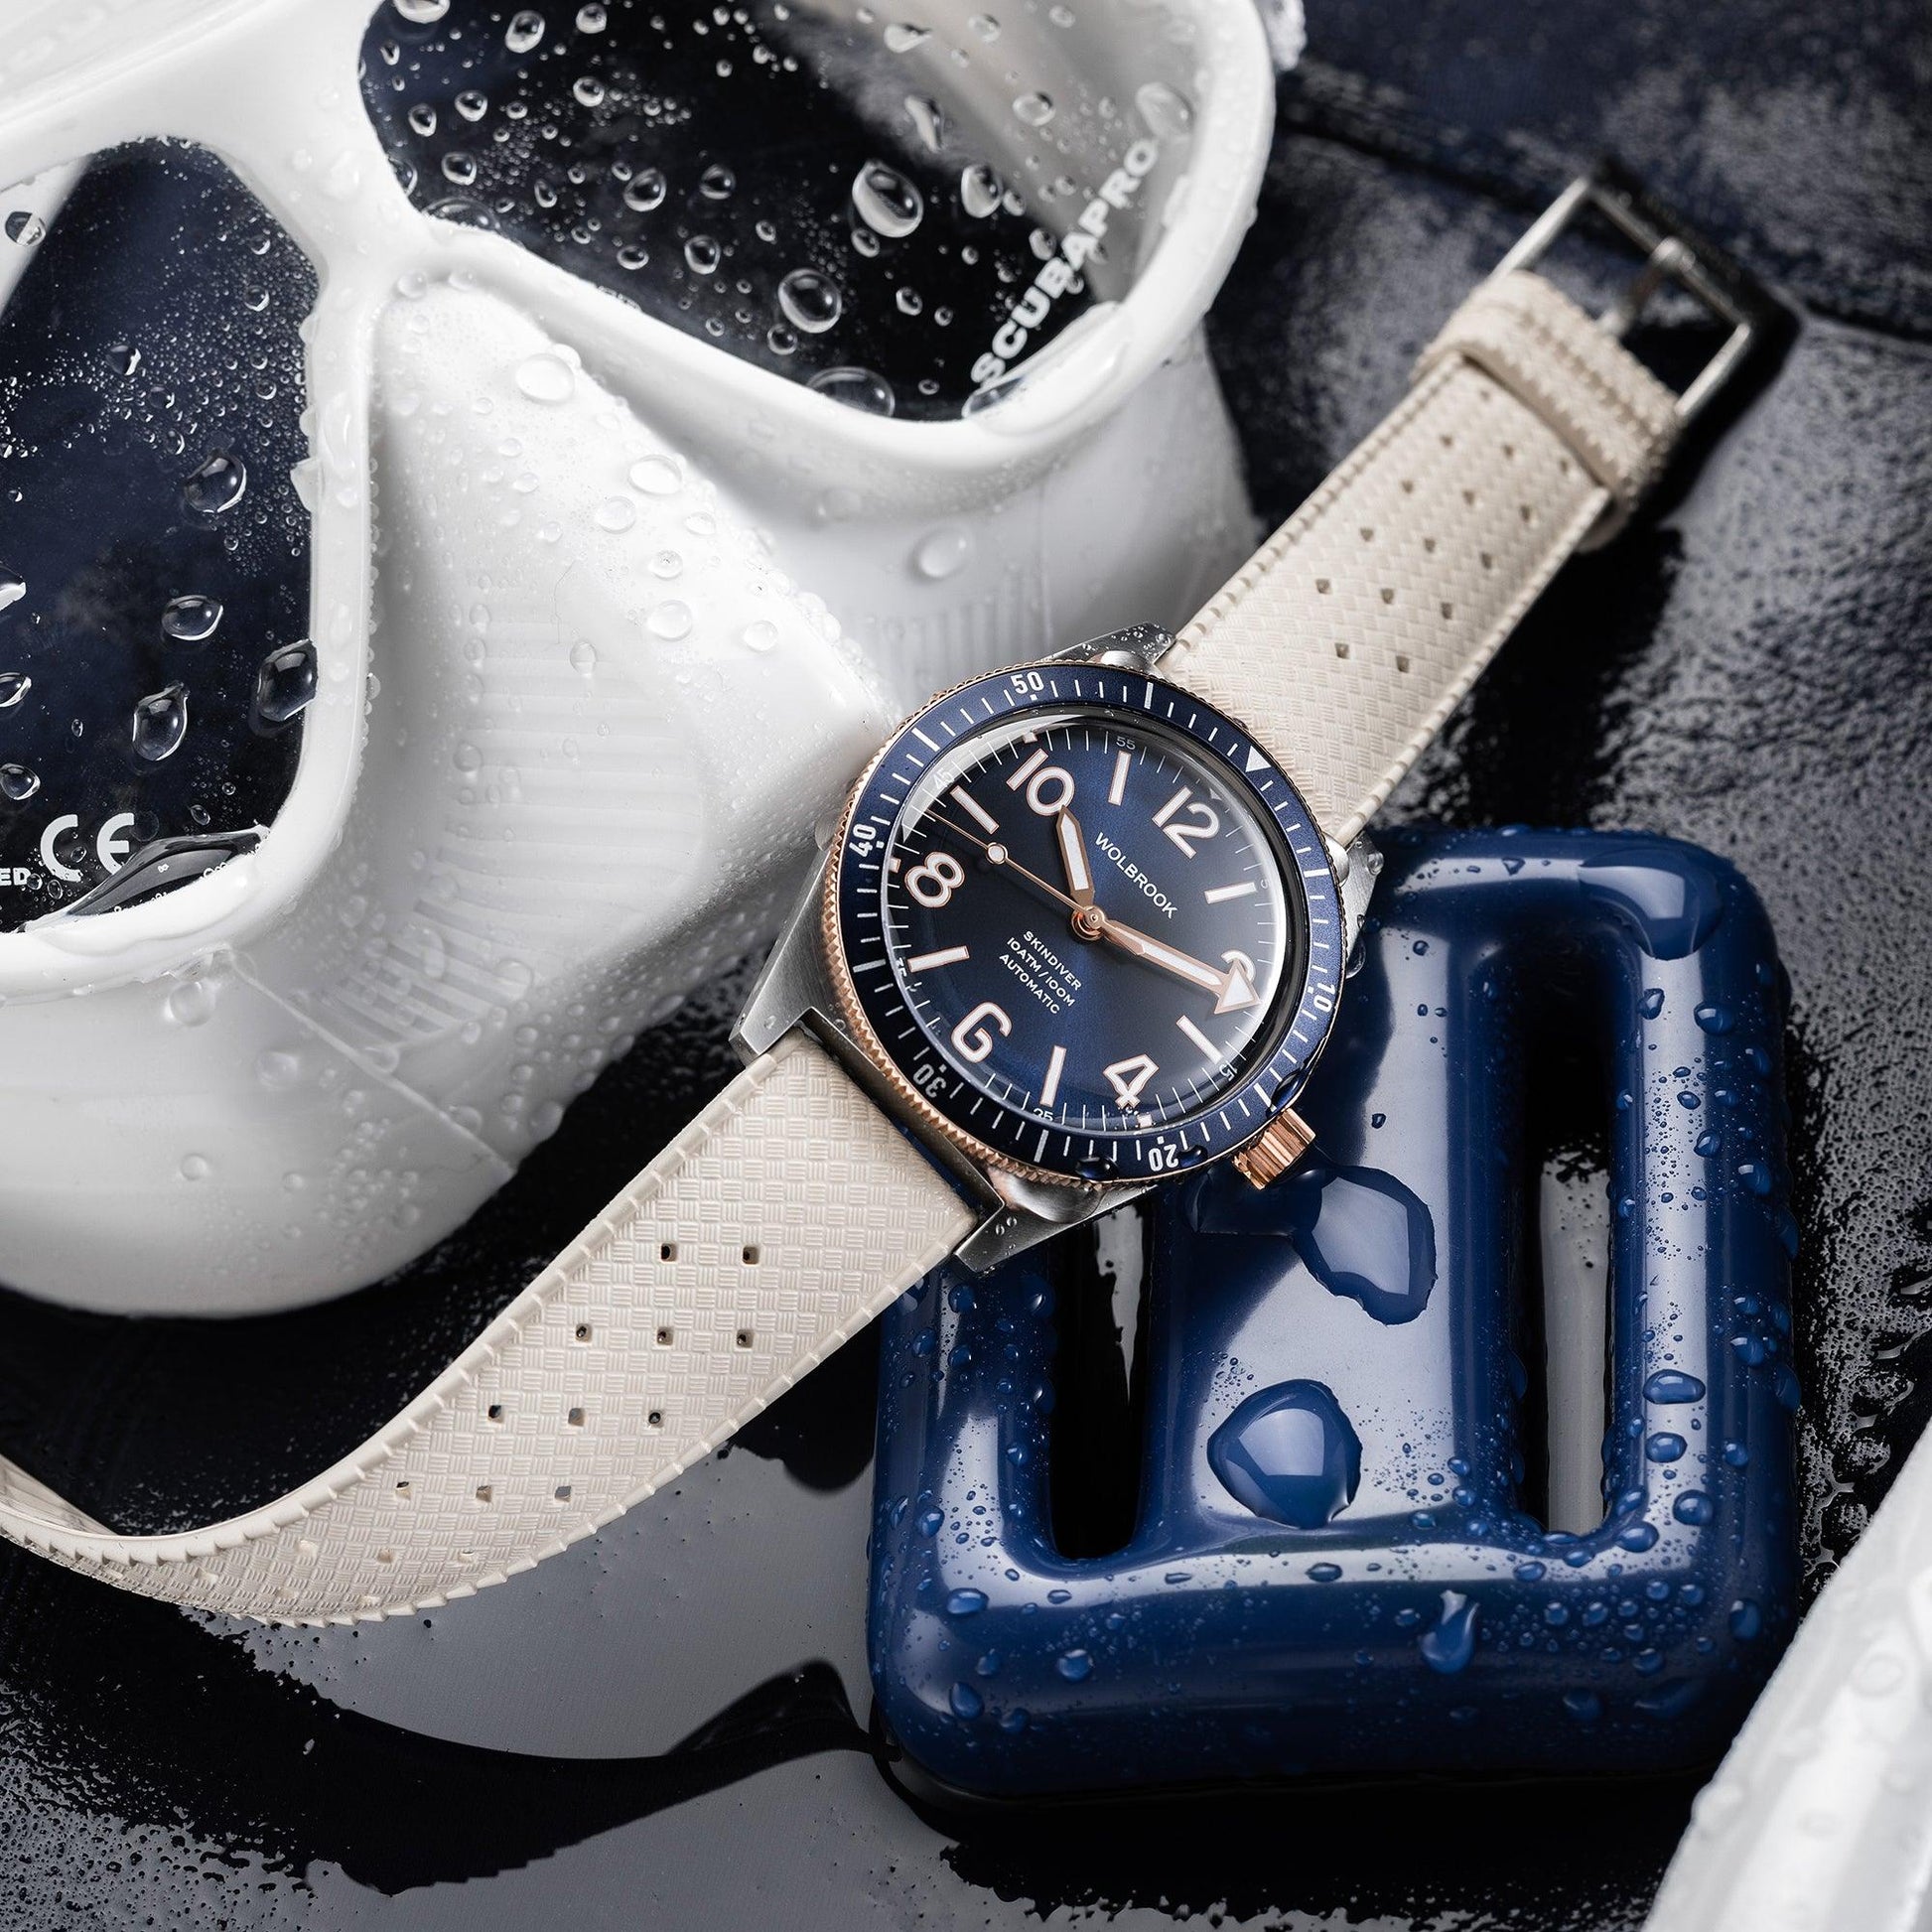 Skindiver Automatic Watch – Two-Tone Blue Sunray & White - Wolbrook Watches